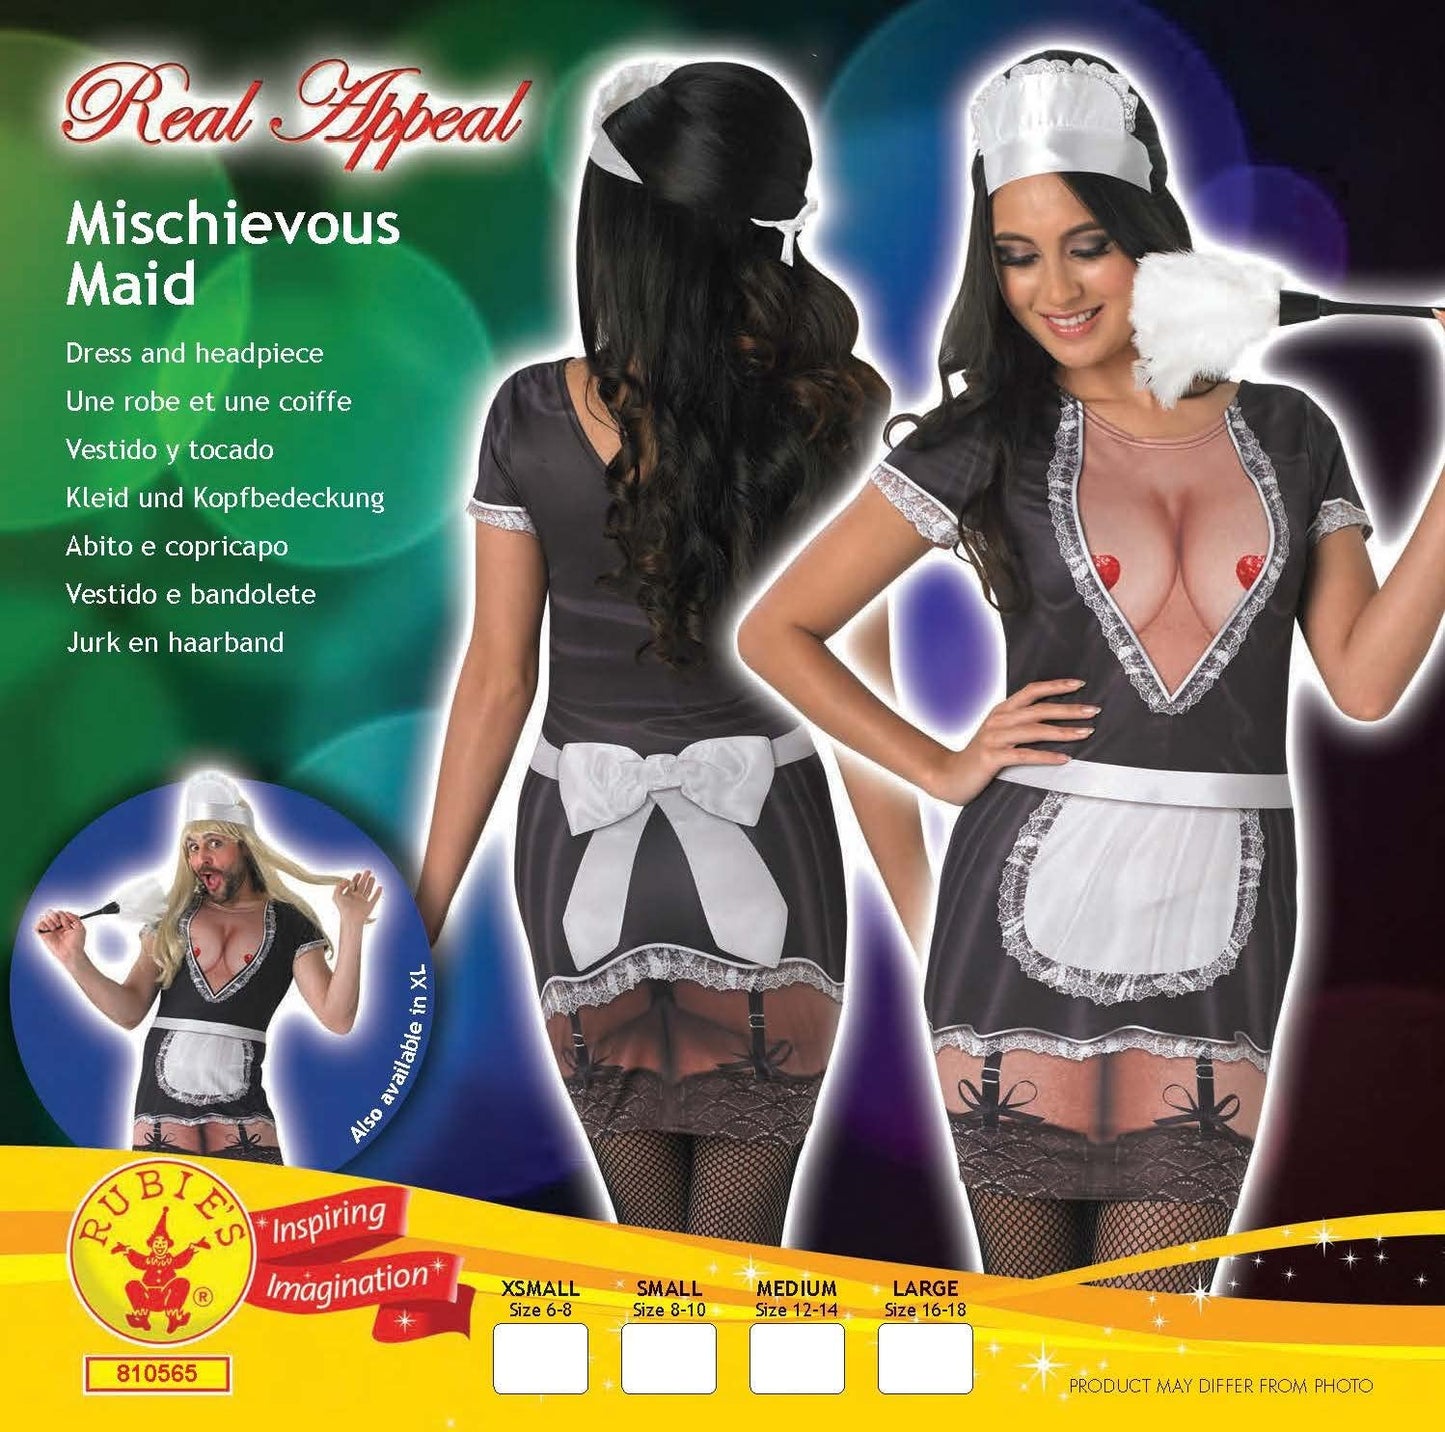 Mischevious Maid Costume Real Appeal Stag Hen Night Black Dress and Headpiece Unisex